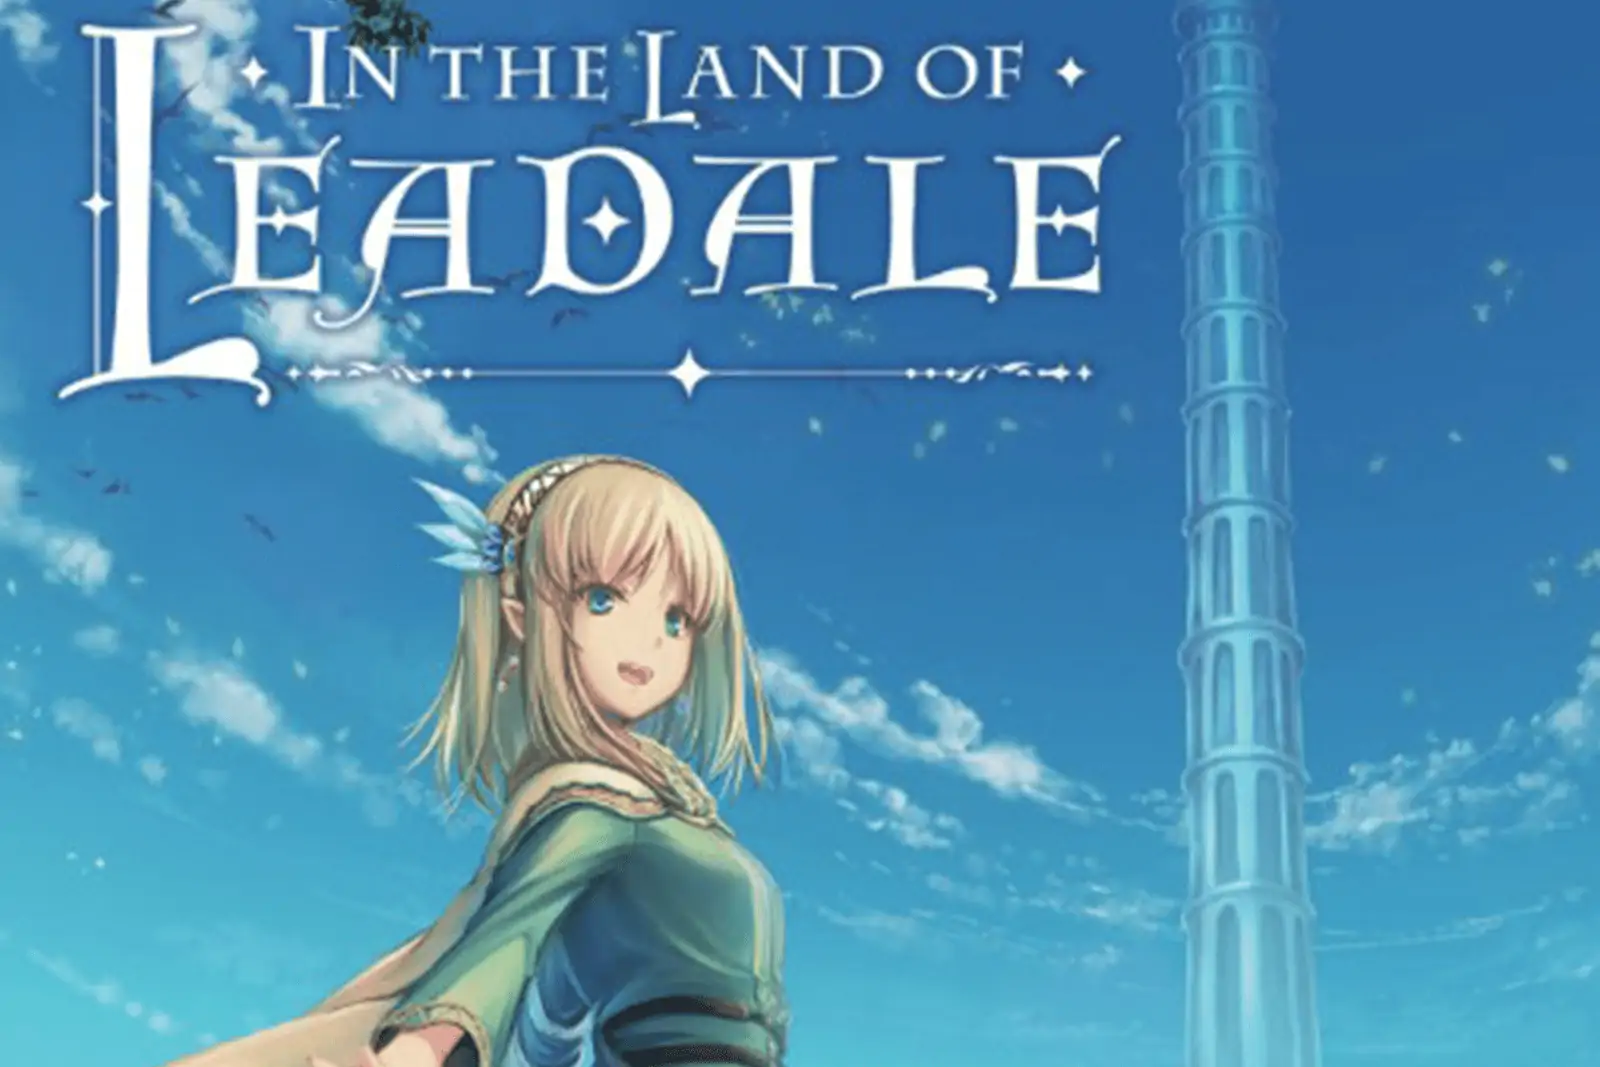 5 Episode Rule, World of Leadale Impressions – All About Anime and Manga